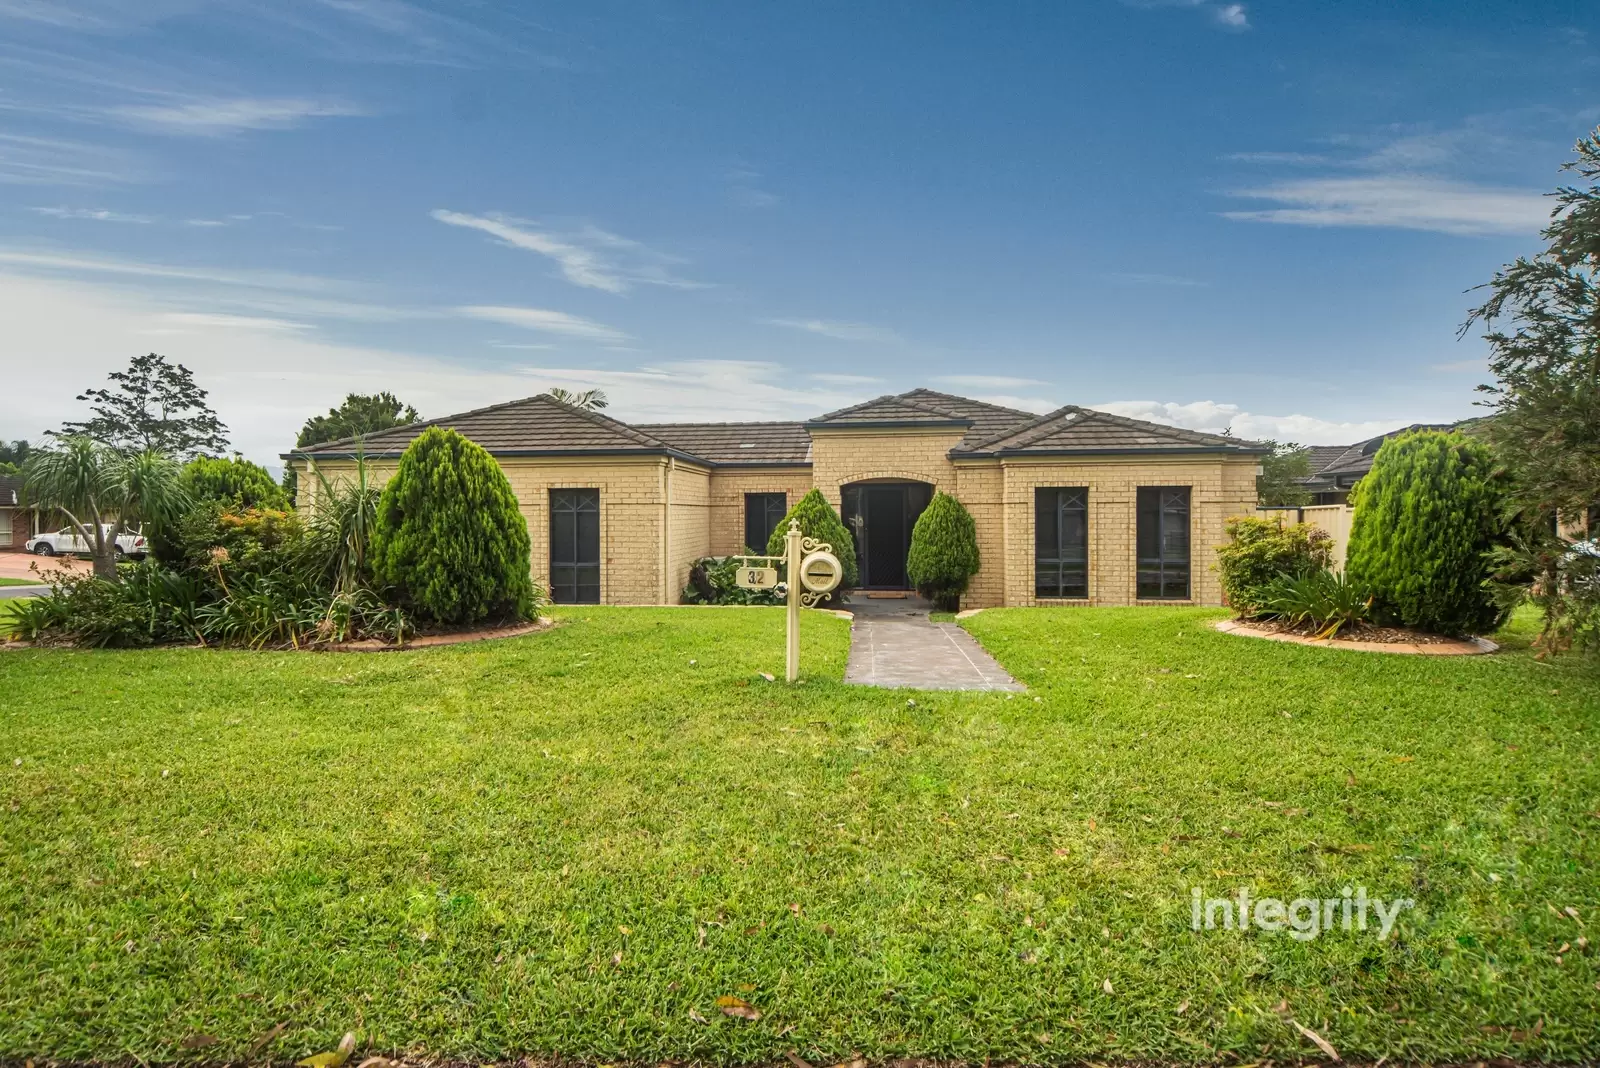 32 The Garden Walk, Worrigee For Sale by Integrity Real Estate - image 2